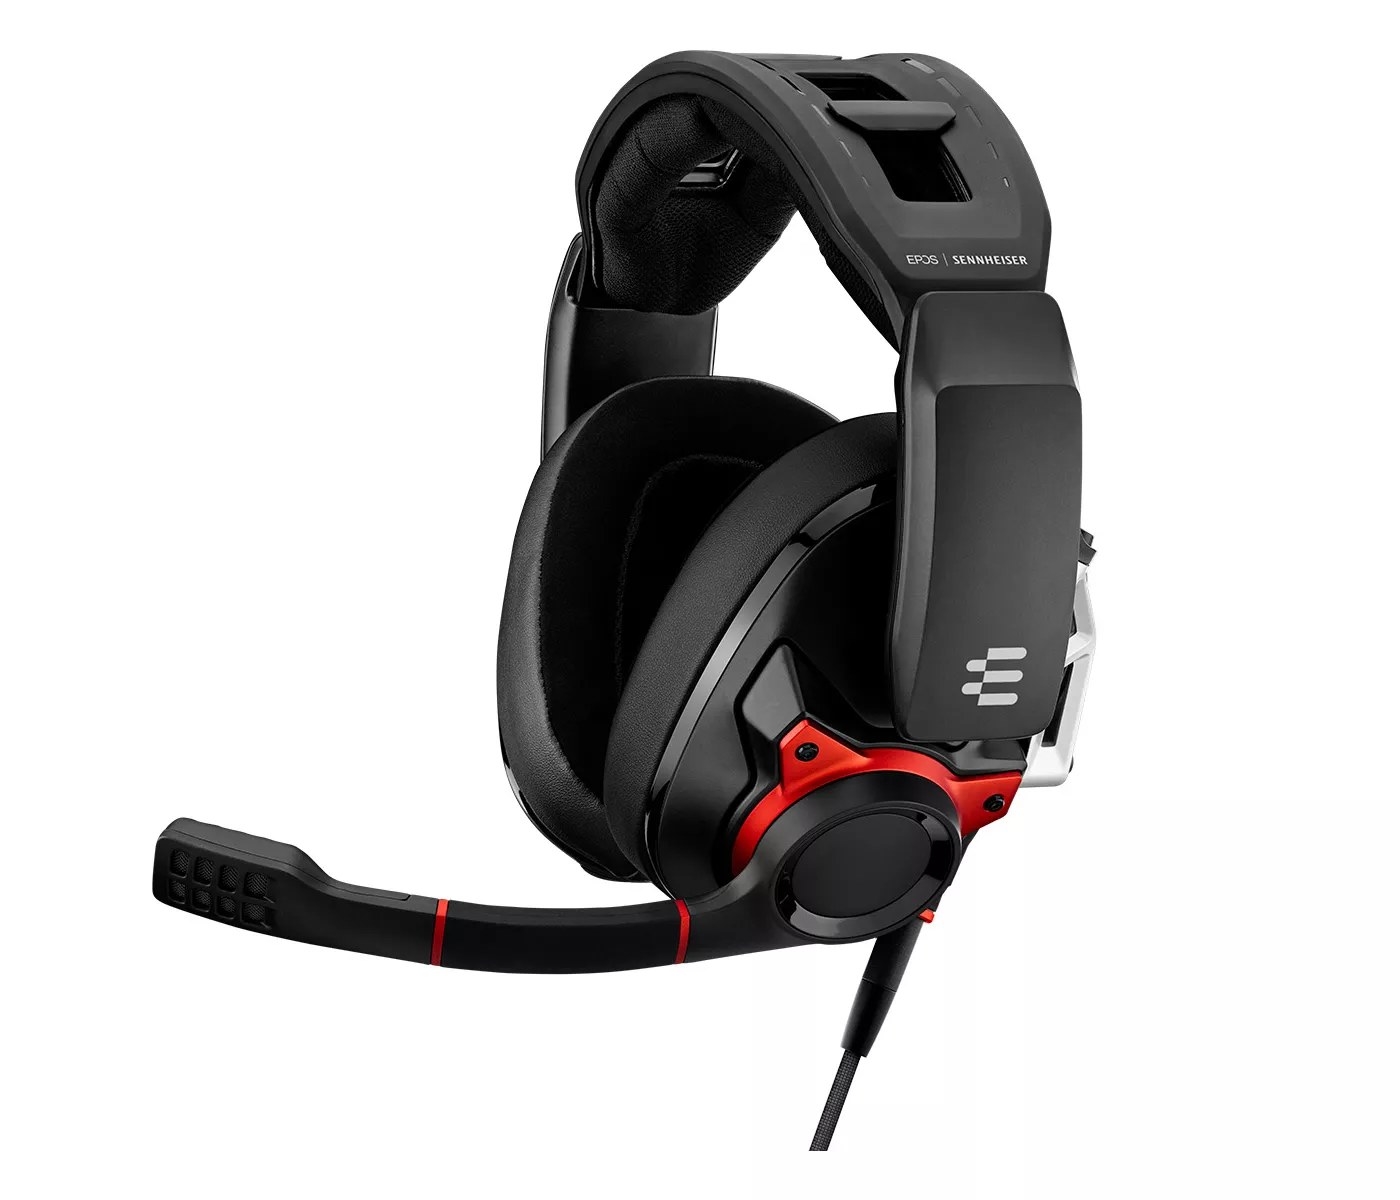 The black and red headset